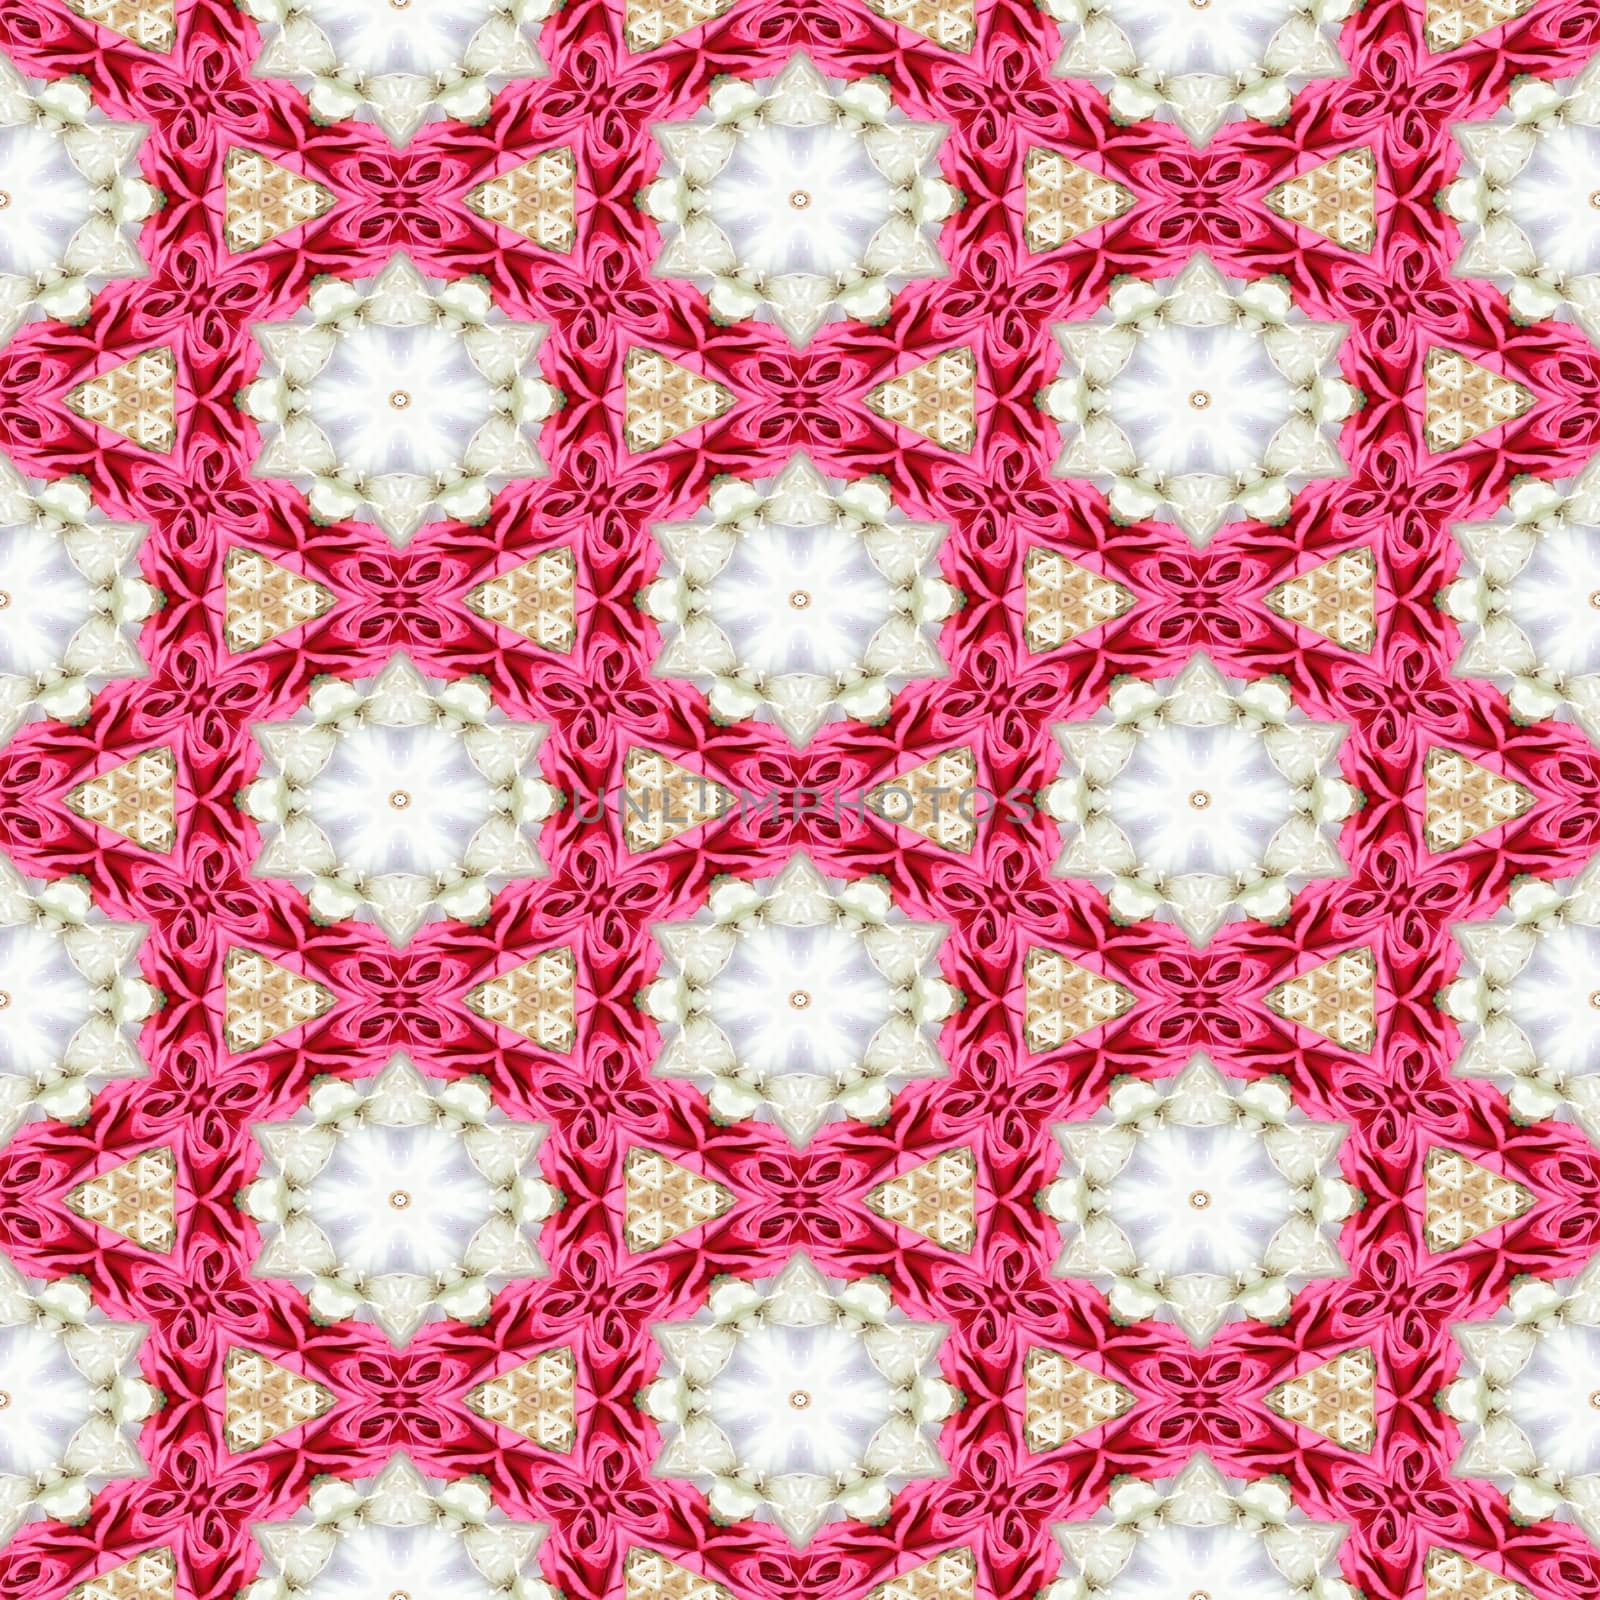 Pink white decorative kaleidoscope mosaic with star shapes and pink ribbons.